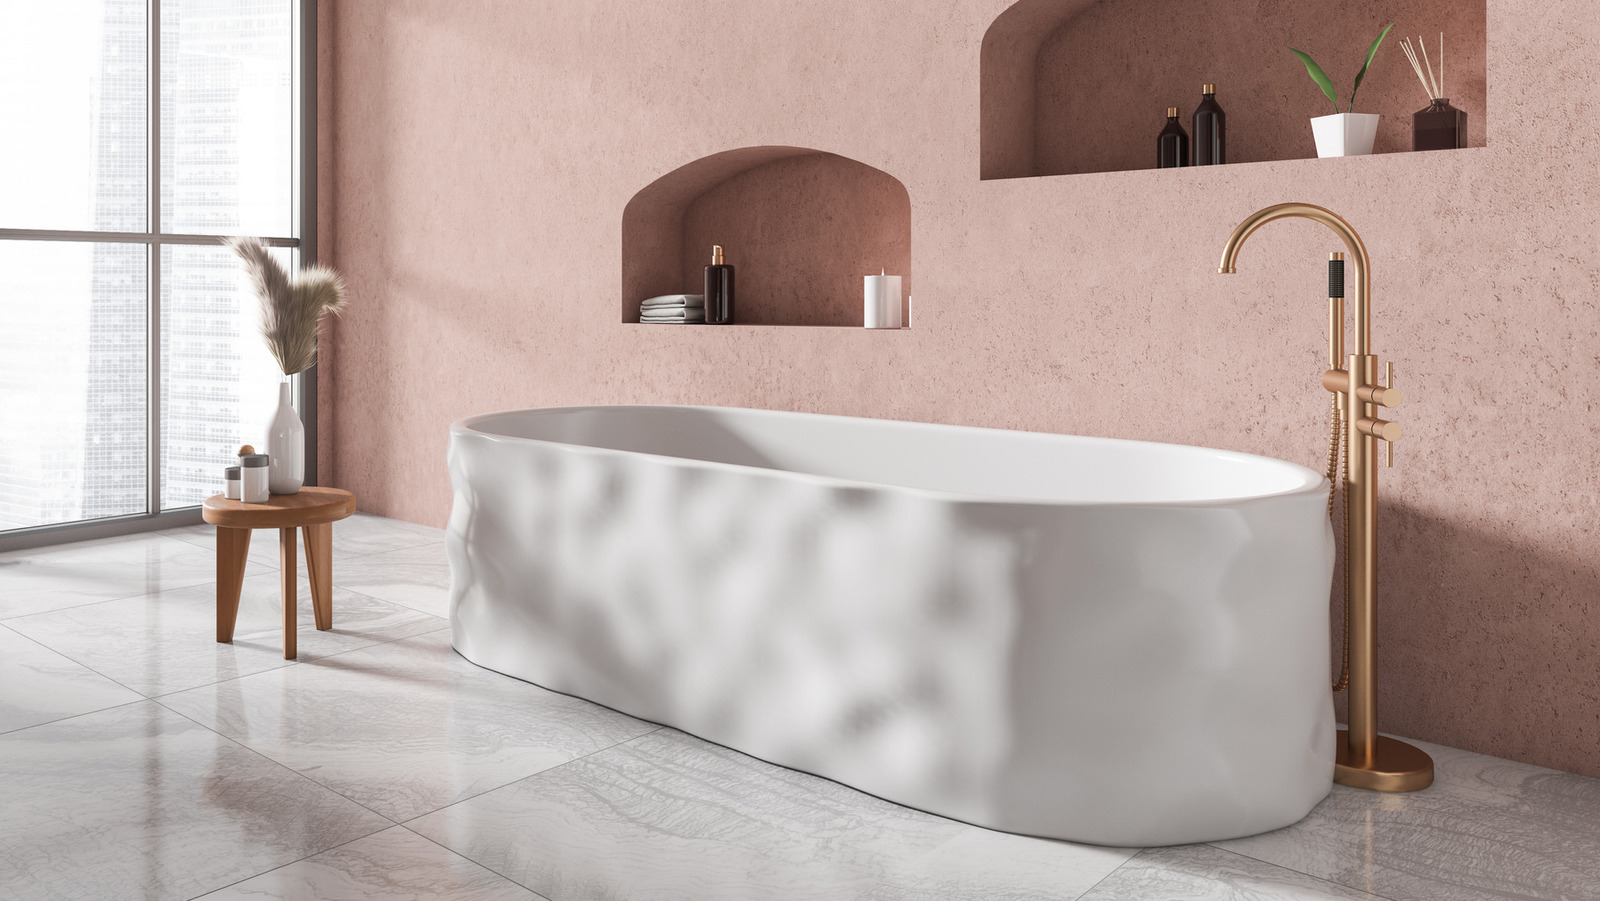 20 Bathtubs That Are So Beautiful You Won't Believe They Are Real